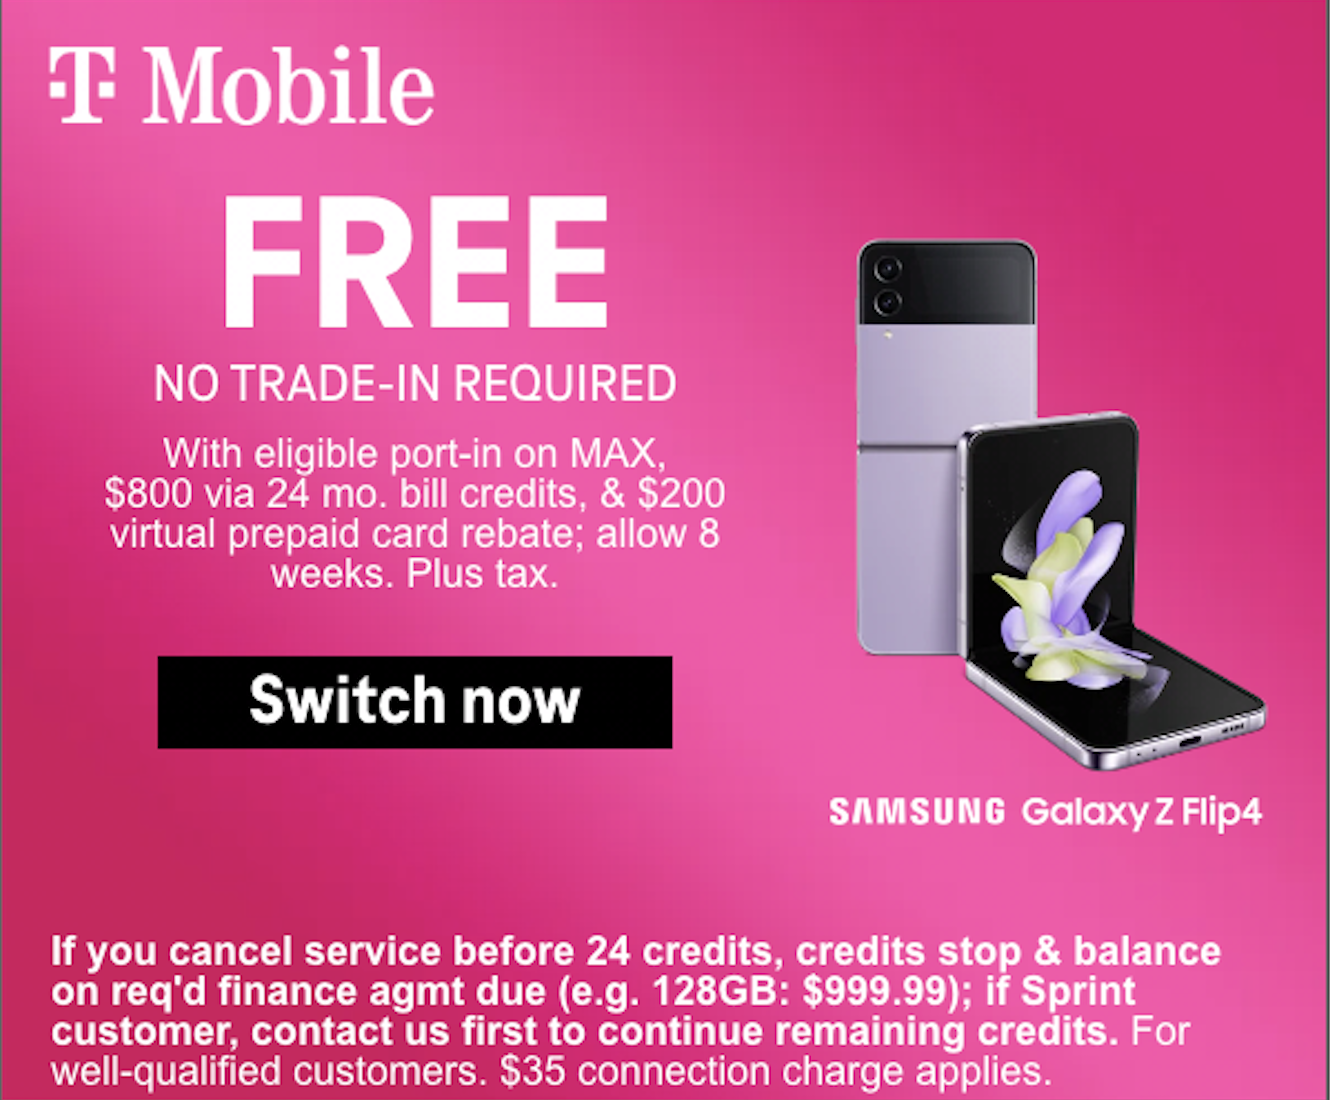 Google Display Ad for T Mobile 